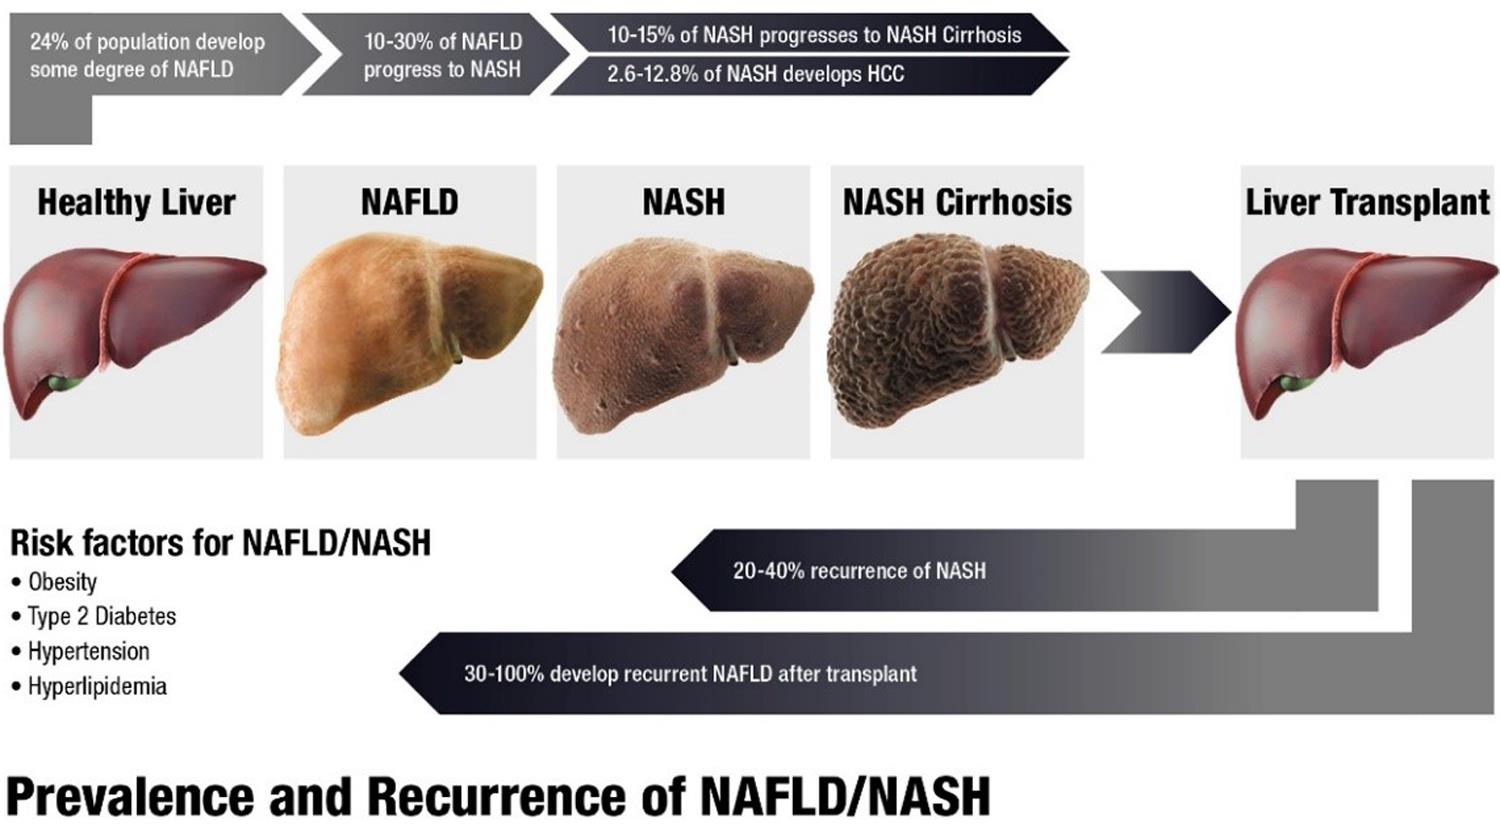 Natural history of nonalcoholic fatty liver disease/nonalcoholic steatohepatitis and recurrence after liver transplantation.